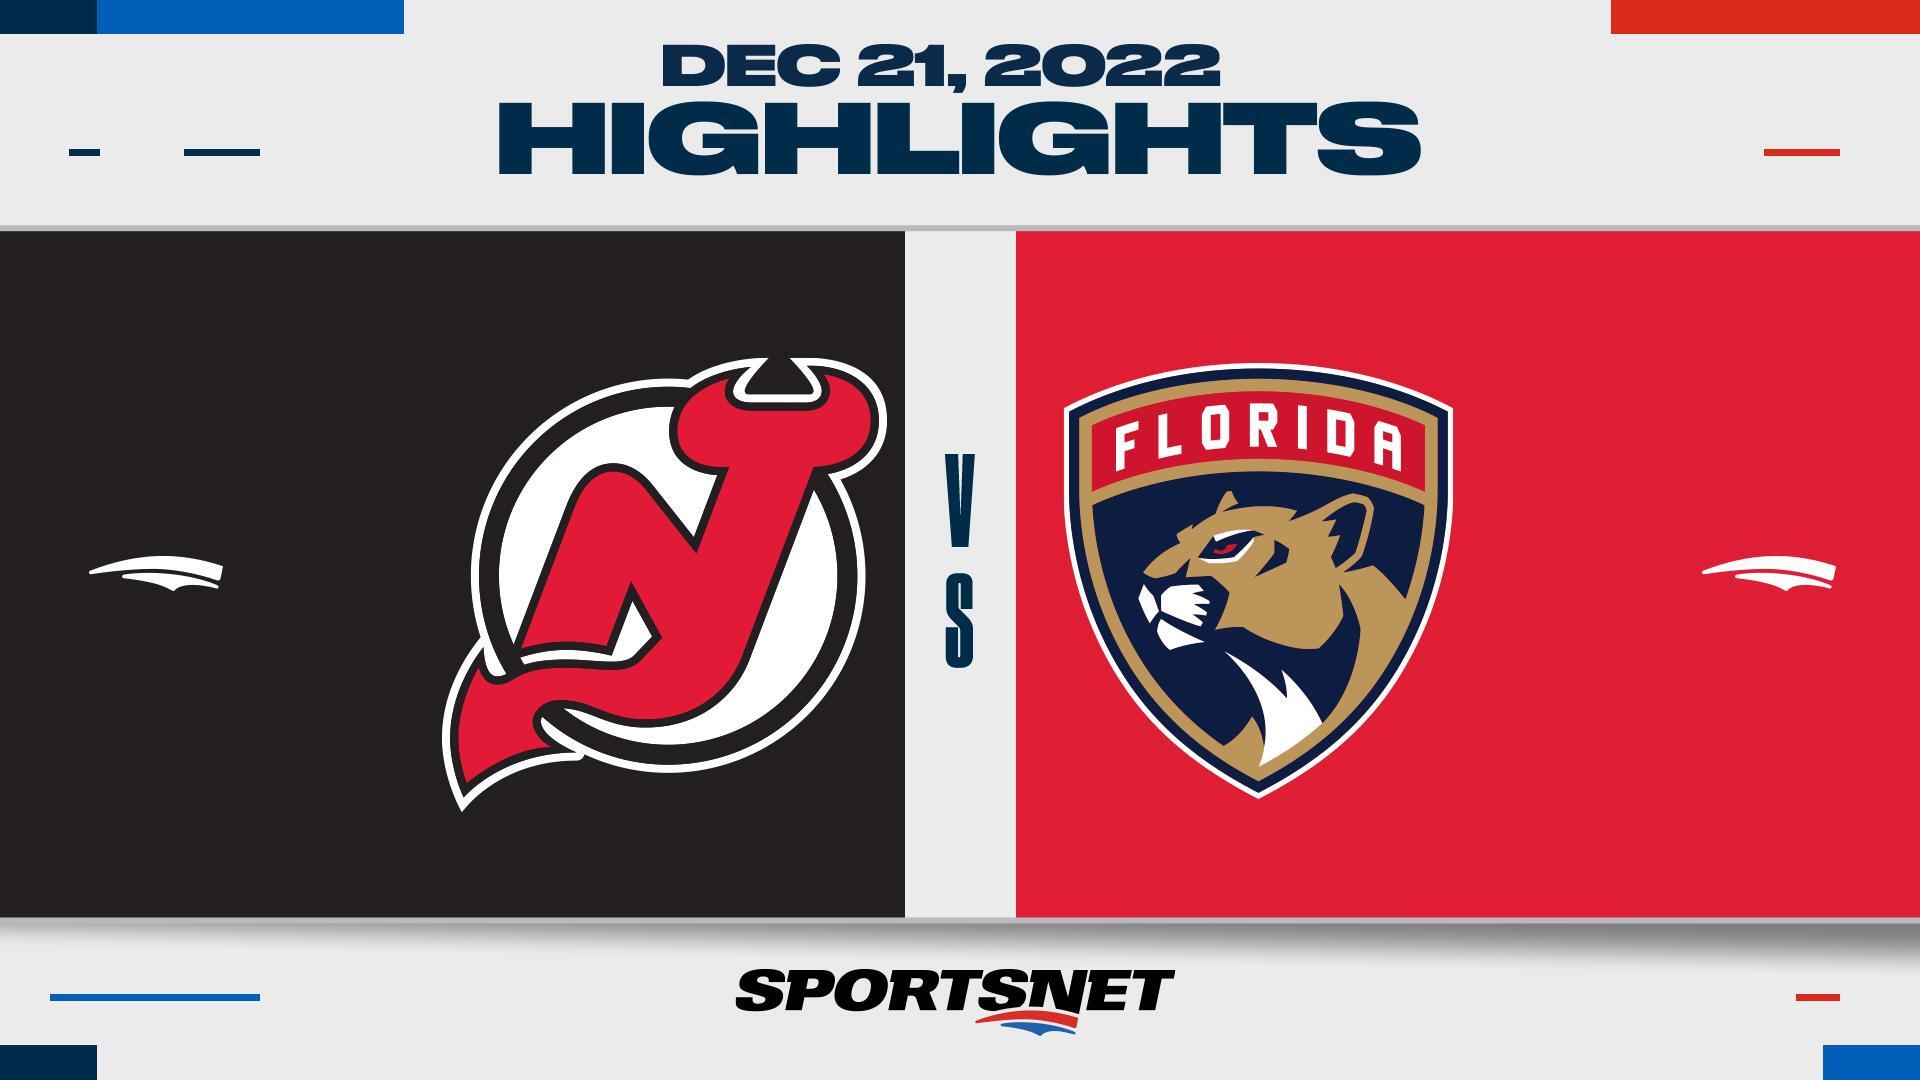 Devils beat Panthers 4-2 to end six-game skid